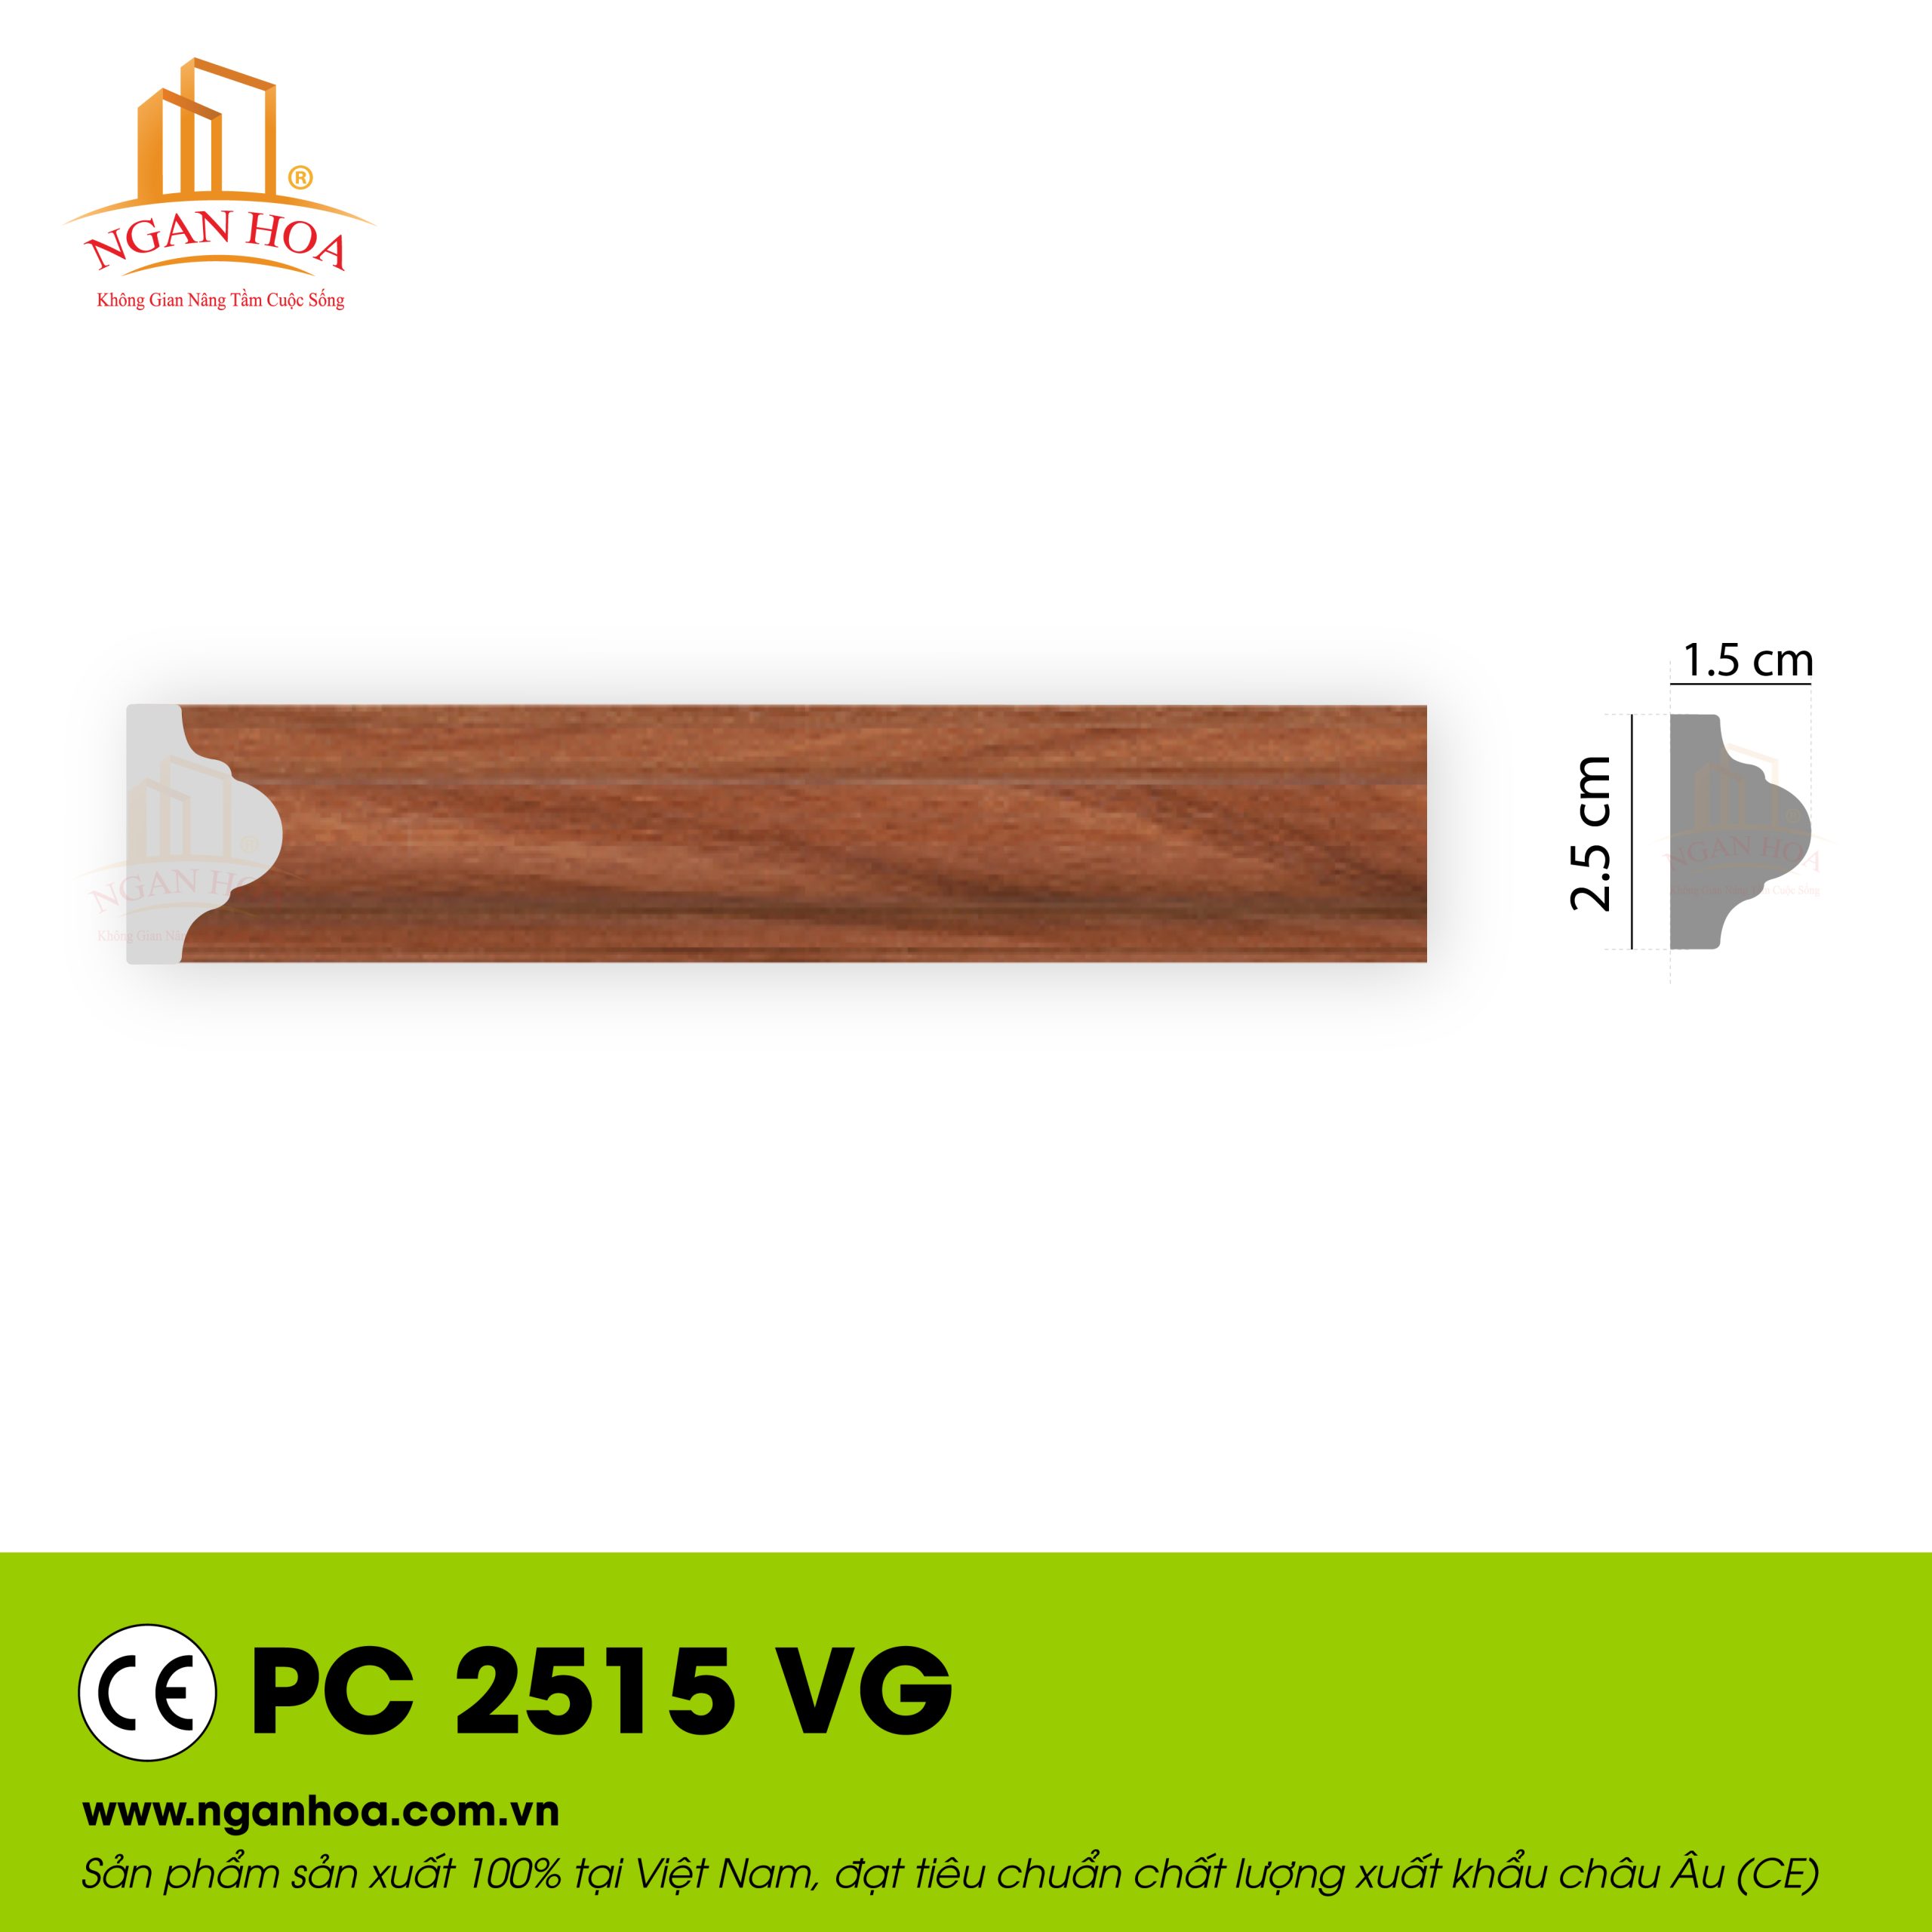 PC 2515 VG scaled